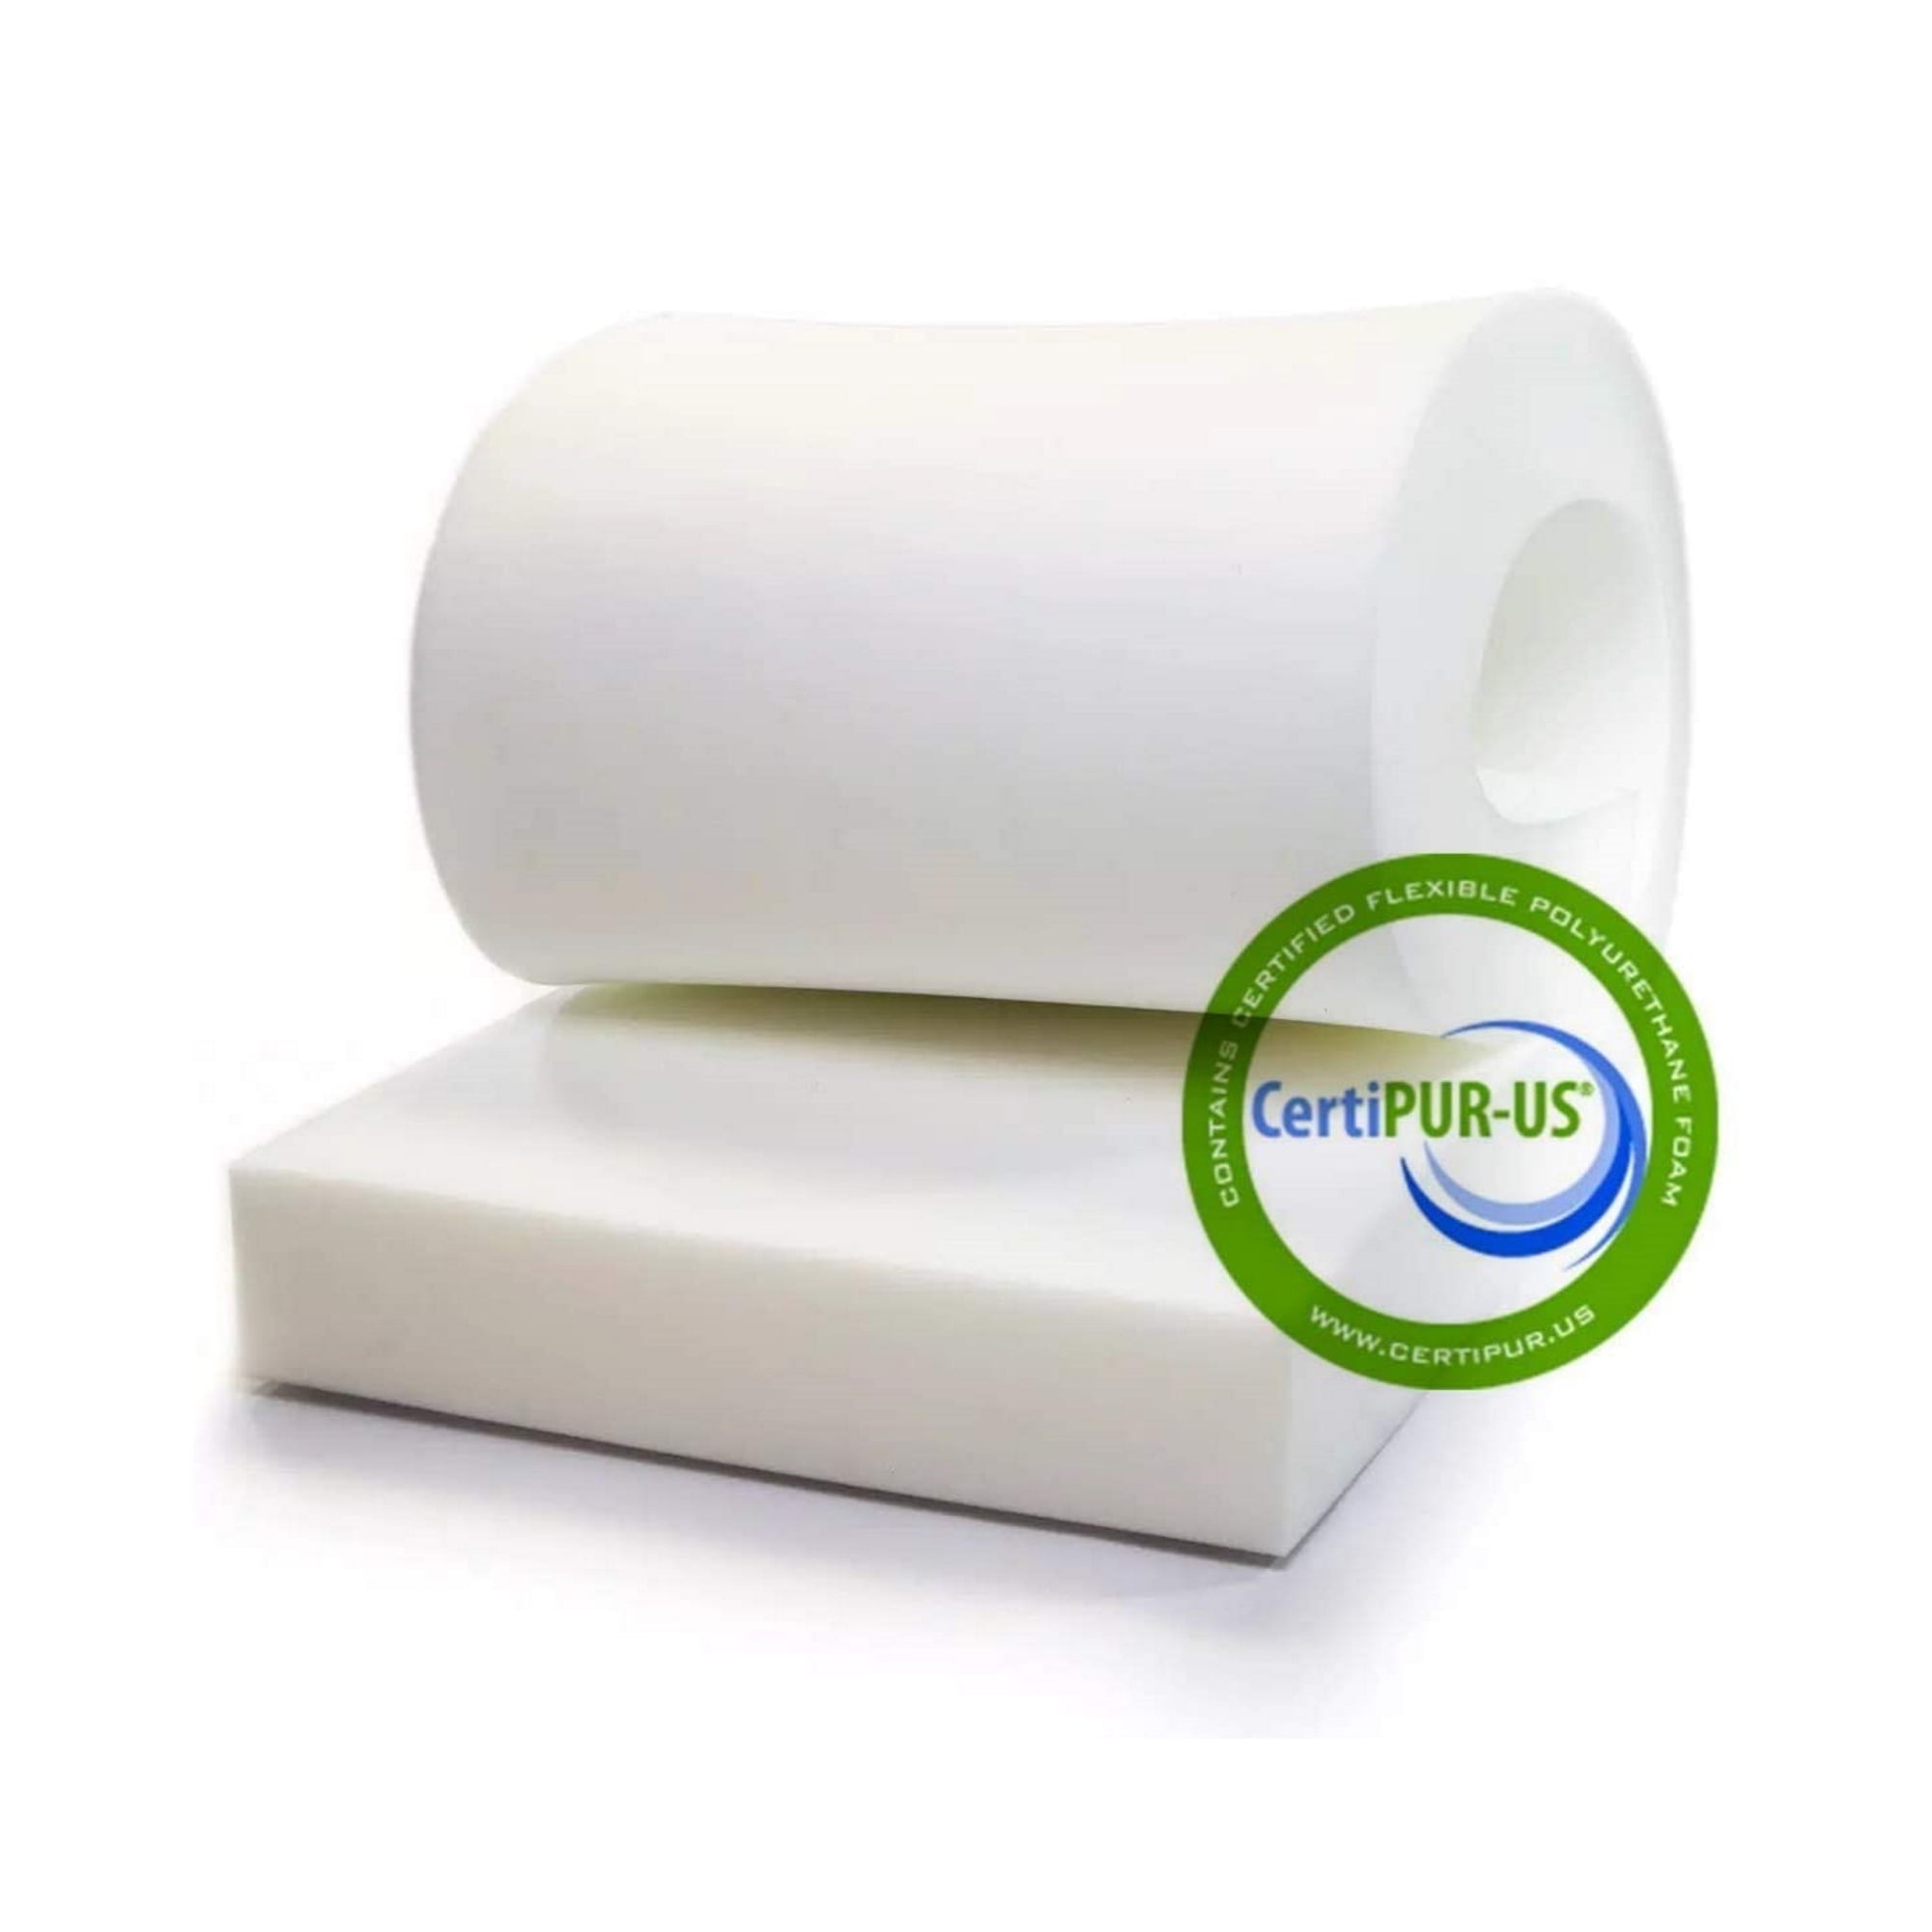 Foamy Foam High Density 4 inch Thick, 24 inch Wide, 24 inch Long Upholstery Foam, Cushion Replacement